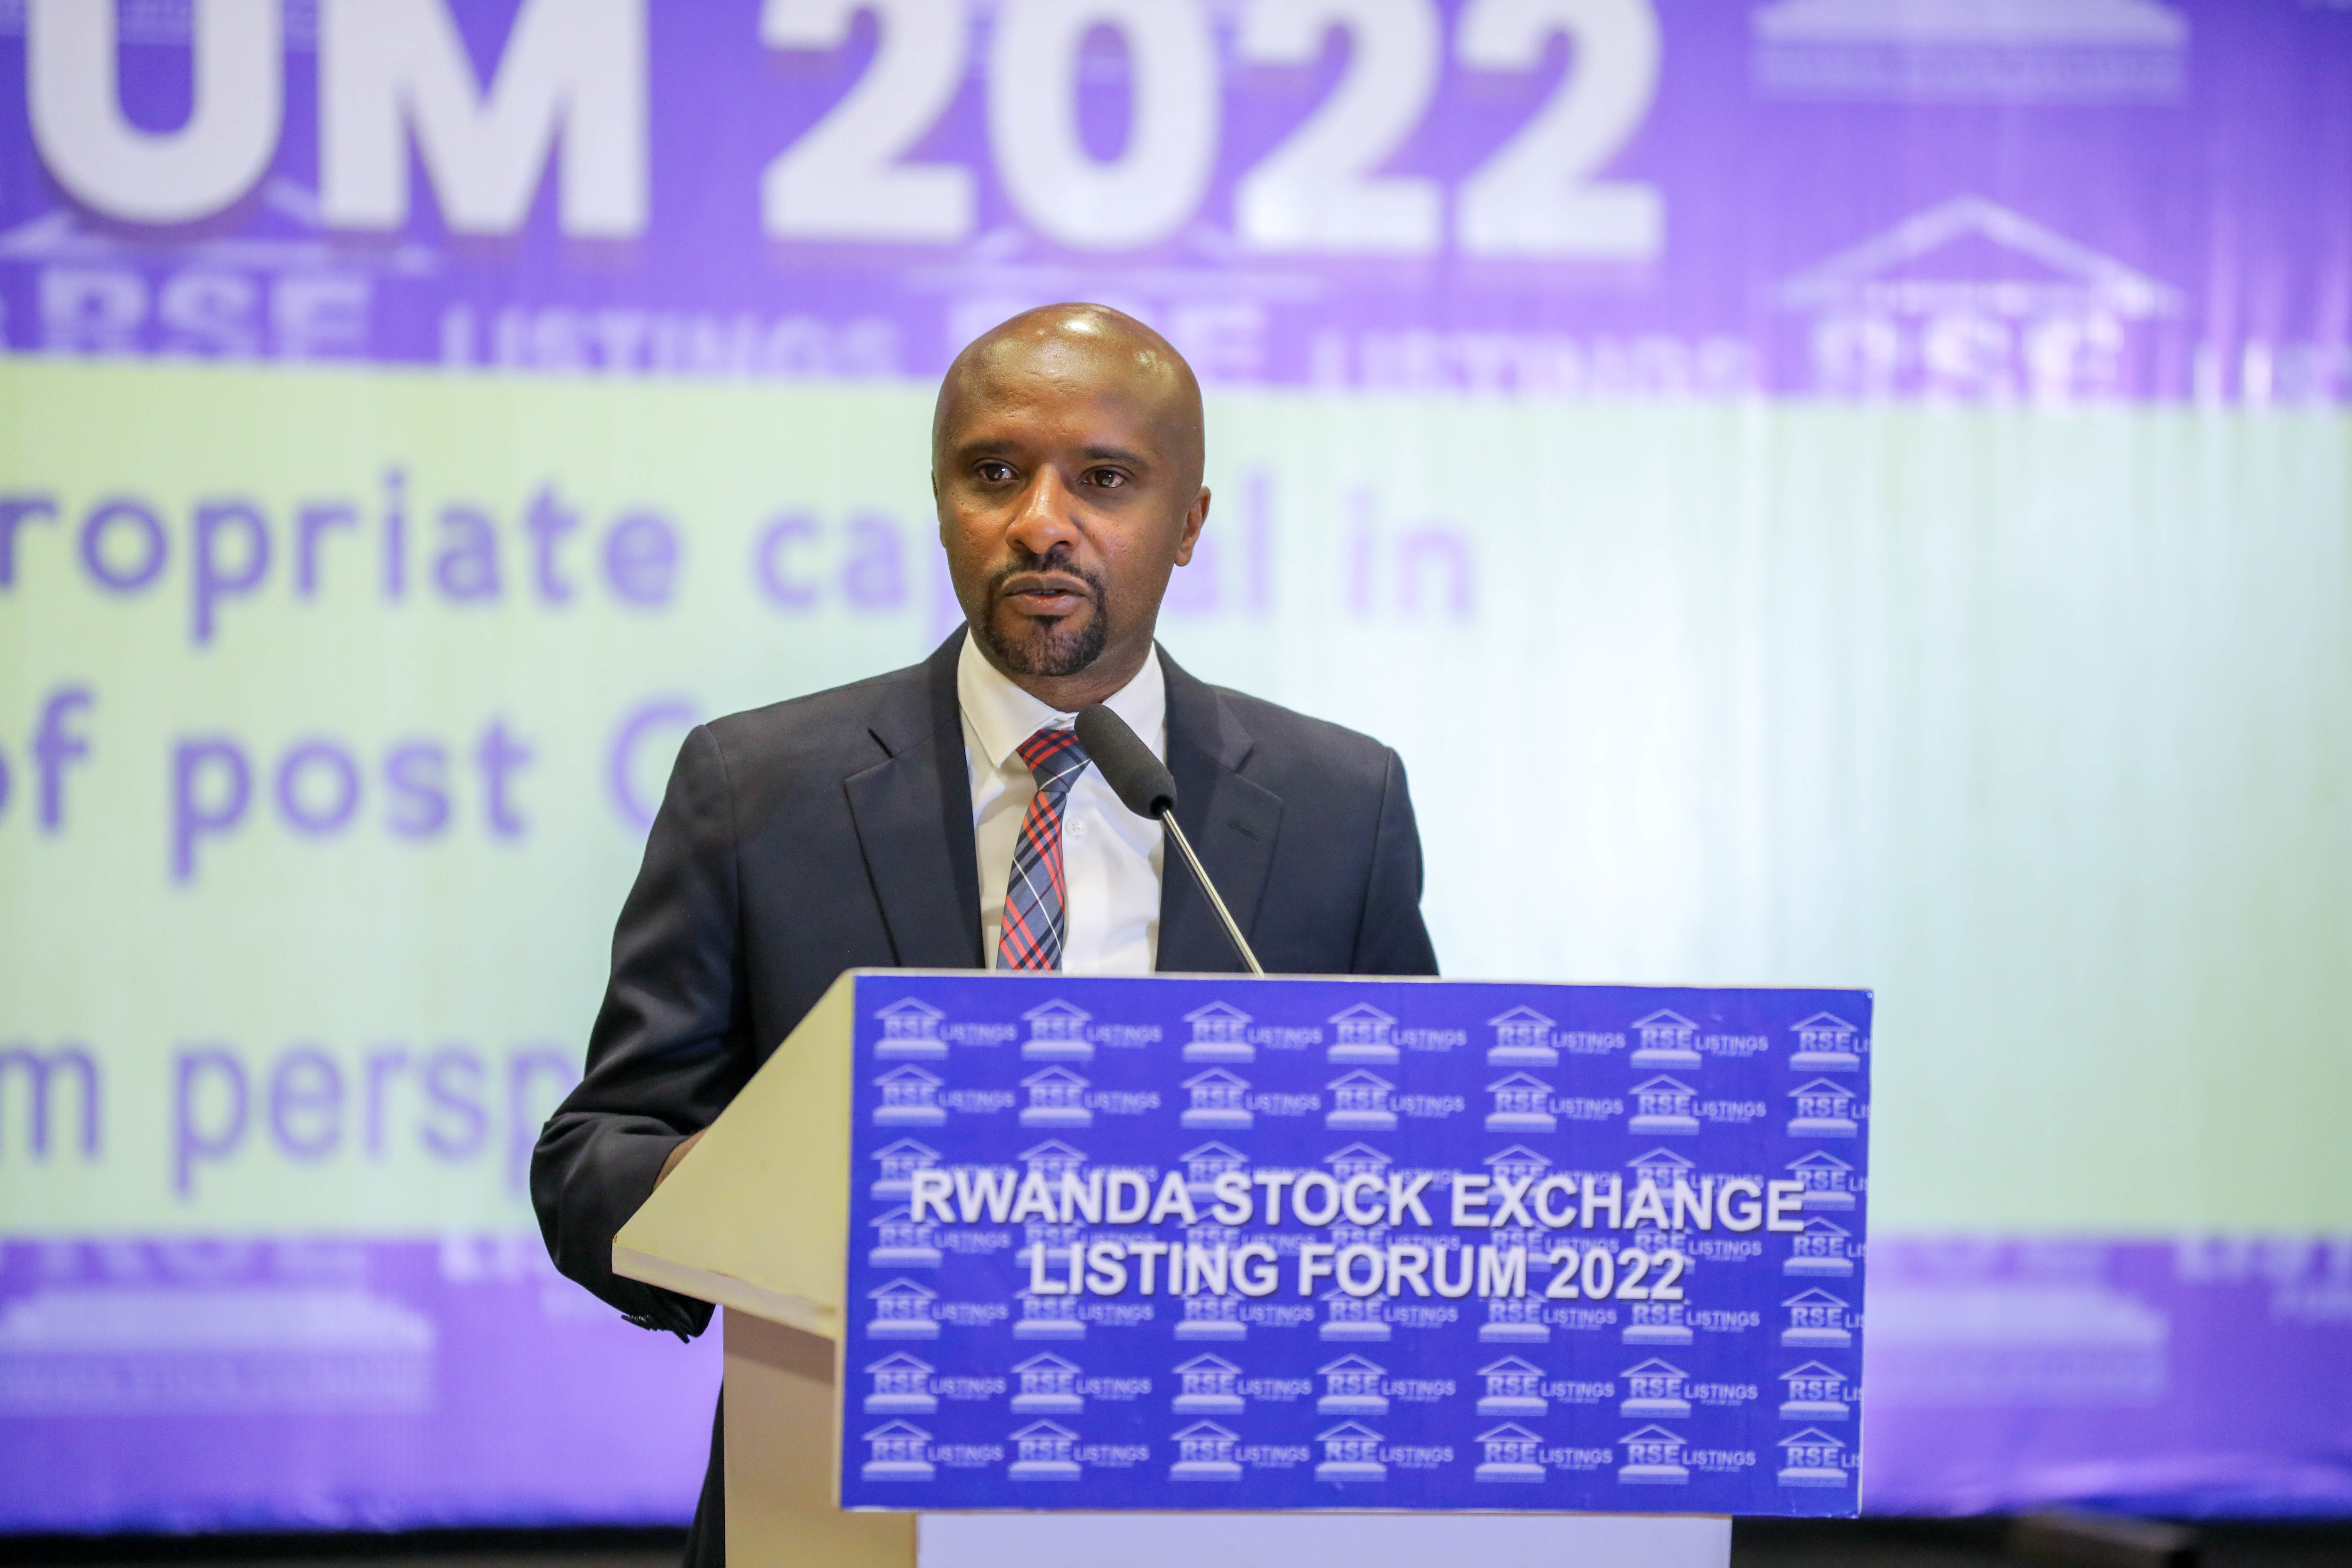 Pierre-Cu00e9lestin Rwabukumba the CEO of Rwanda Stock Exchange delivers remarks during the forum on August 4. / All photos by Dan Nsengiyumva